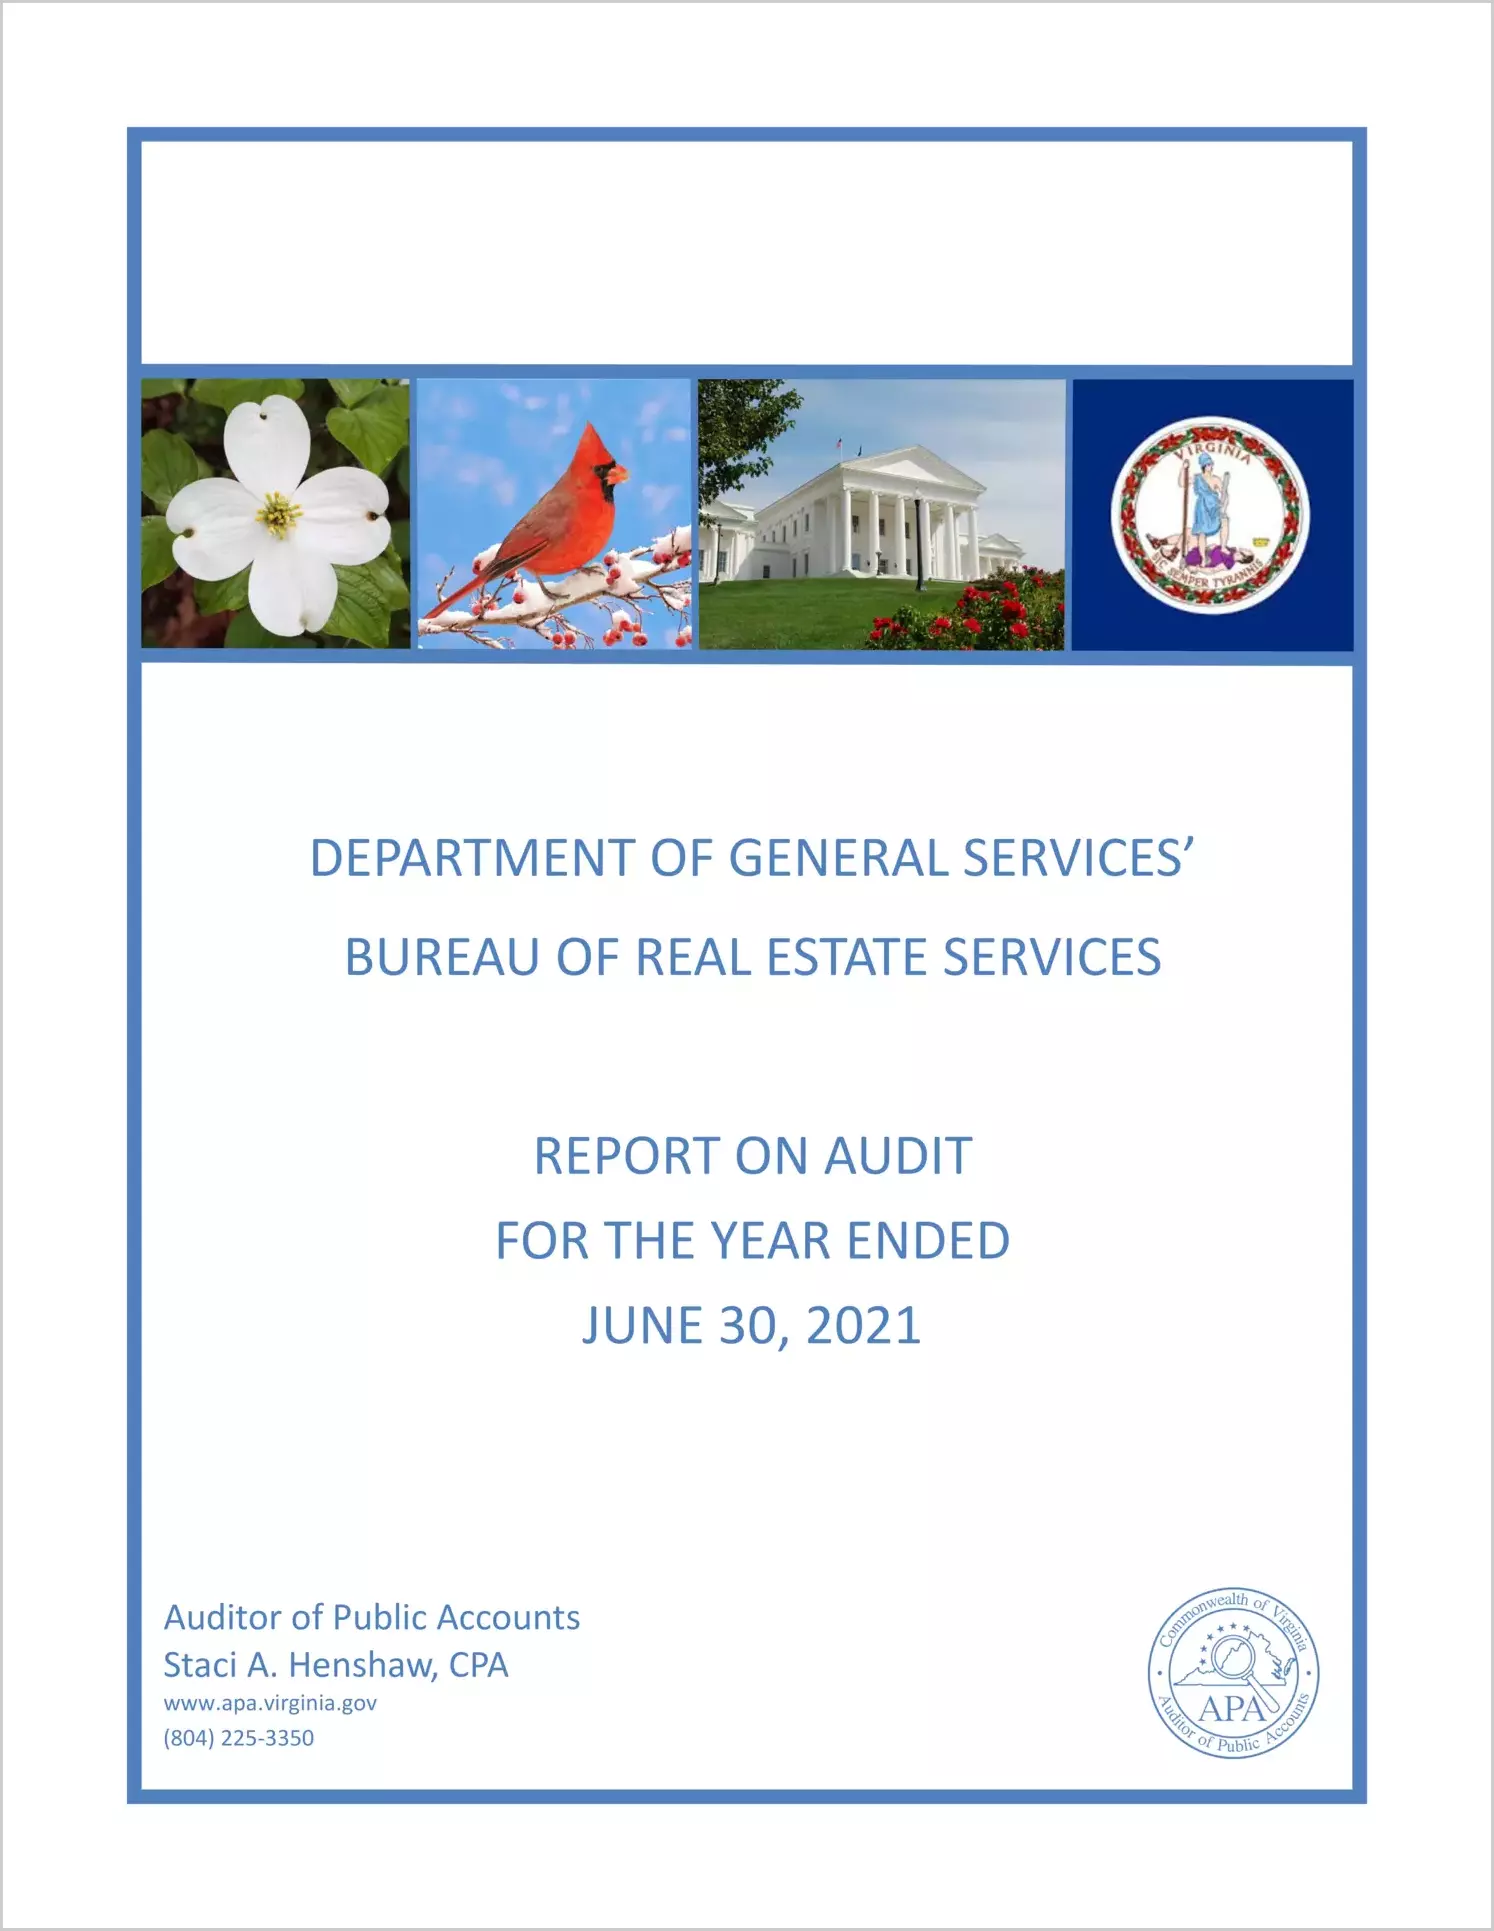 Department of General Service's Bureau of Real Estate Services for the year ended June 30, 2021